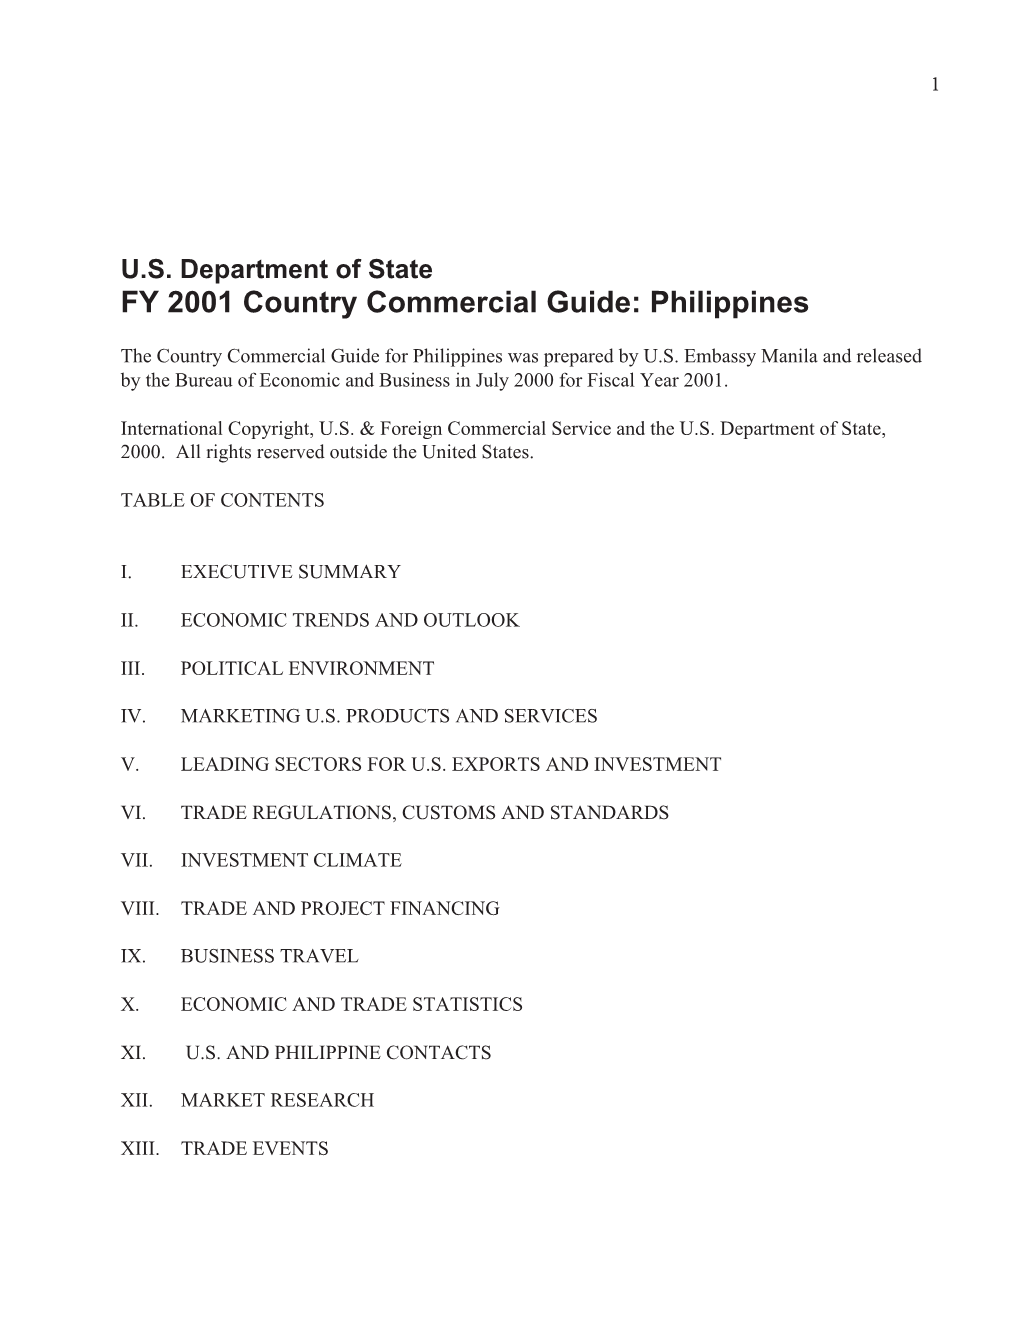 FY 2001 Country Commercial Guide: Philippines